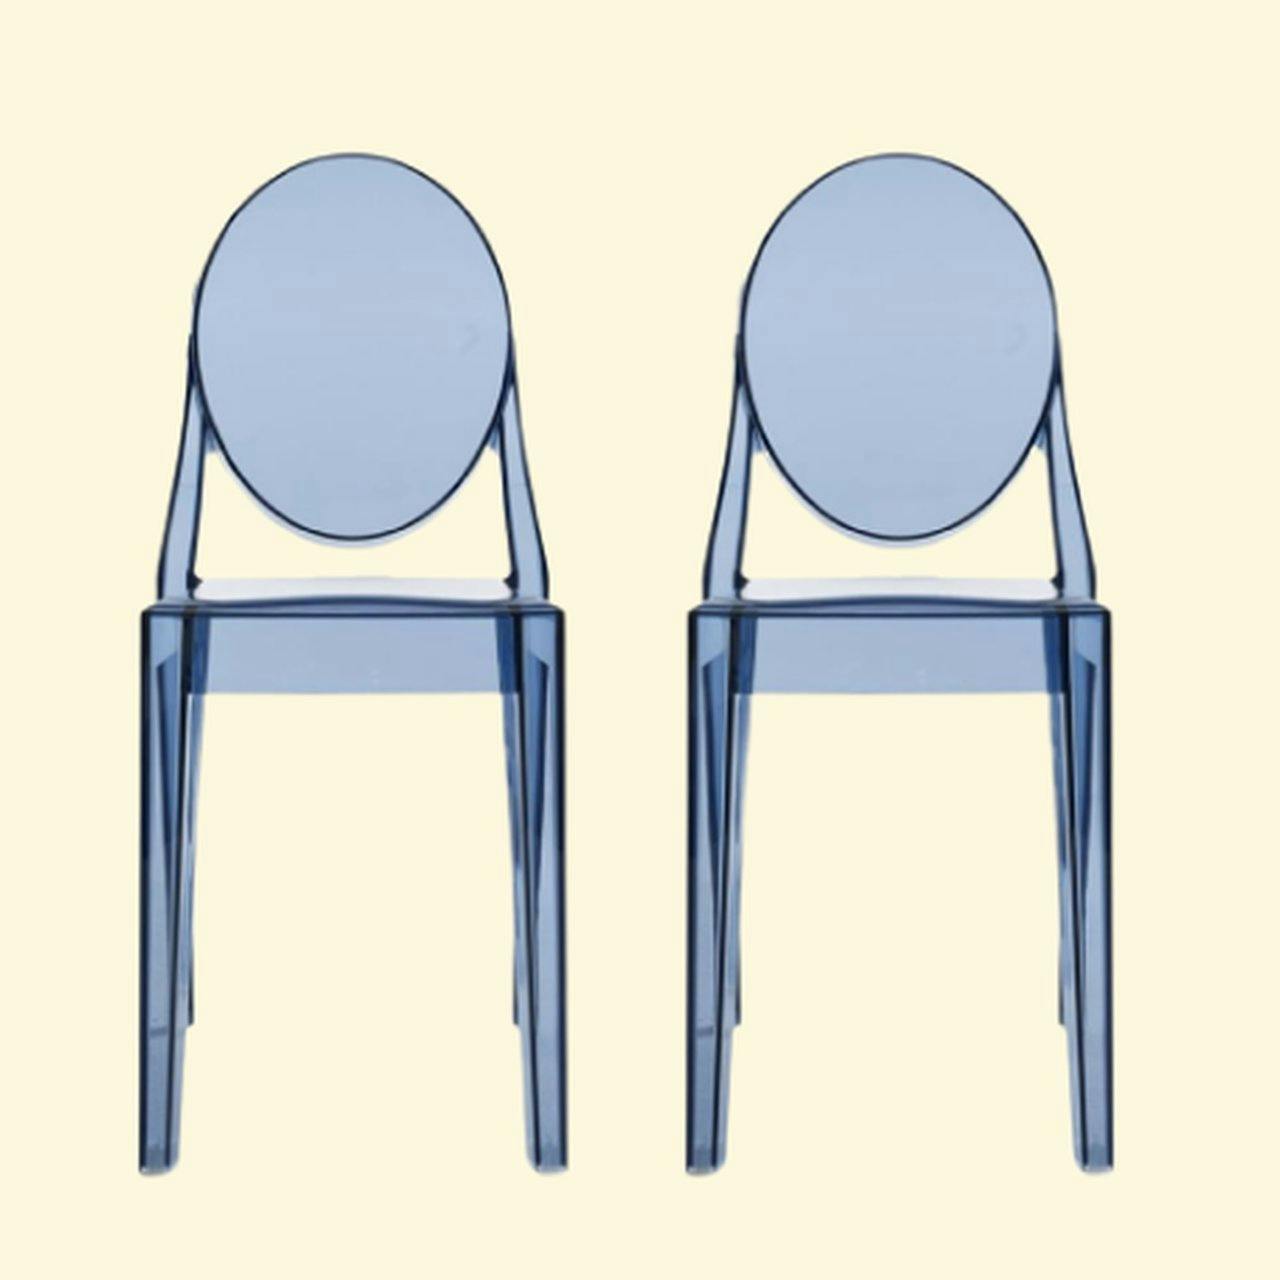 Ole Wanscher Dining chairs